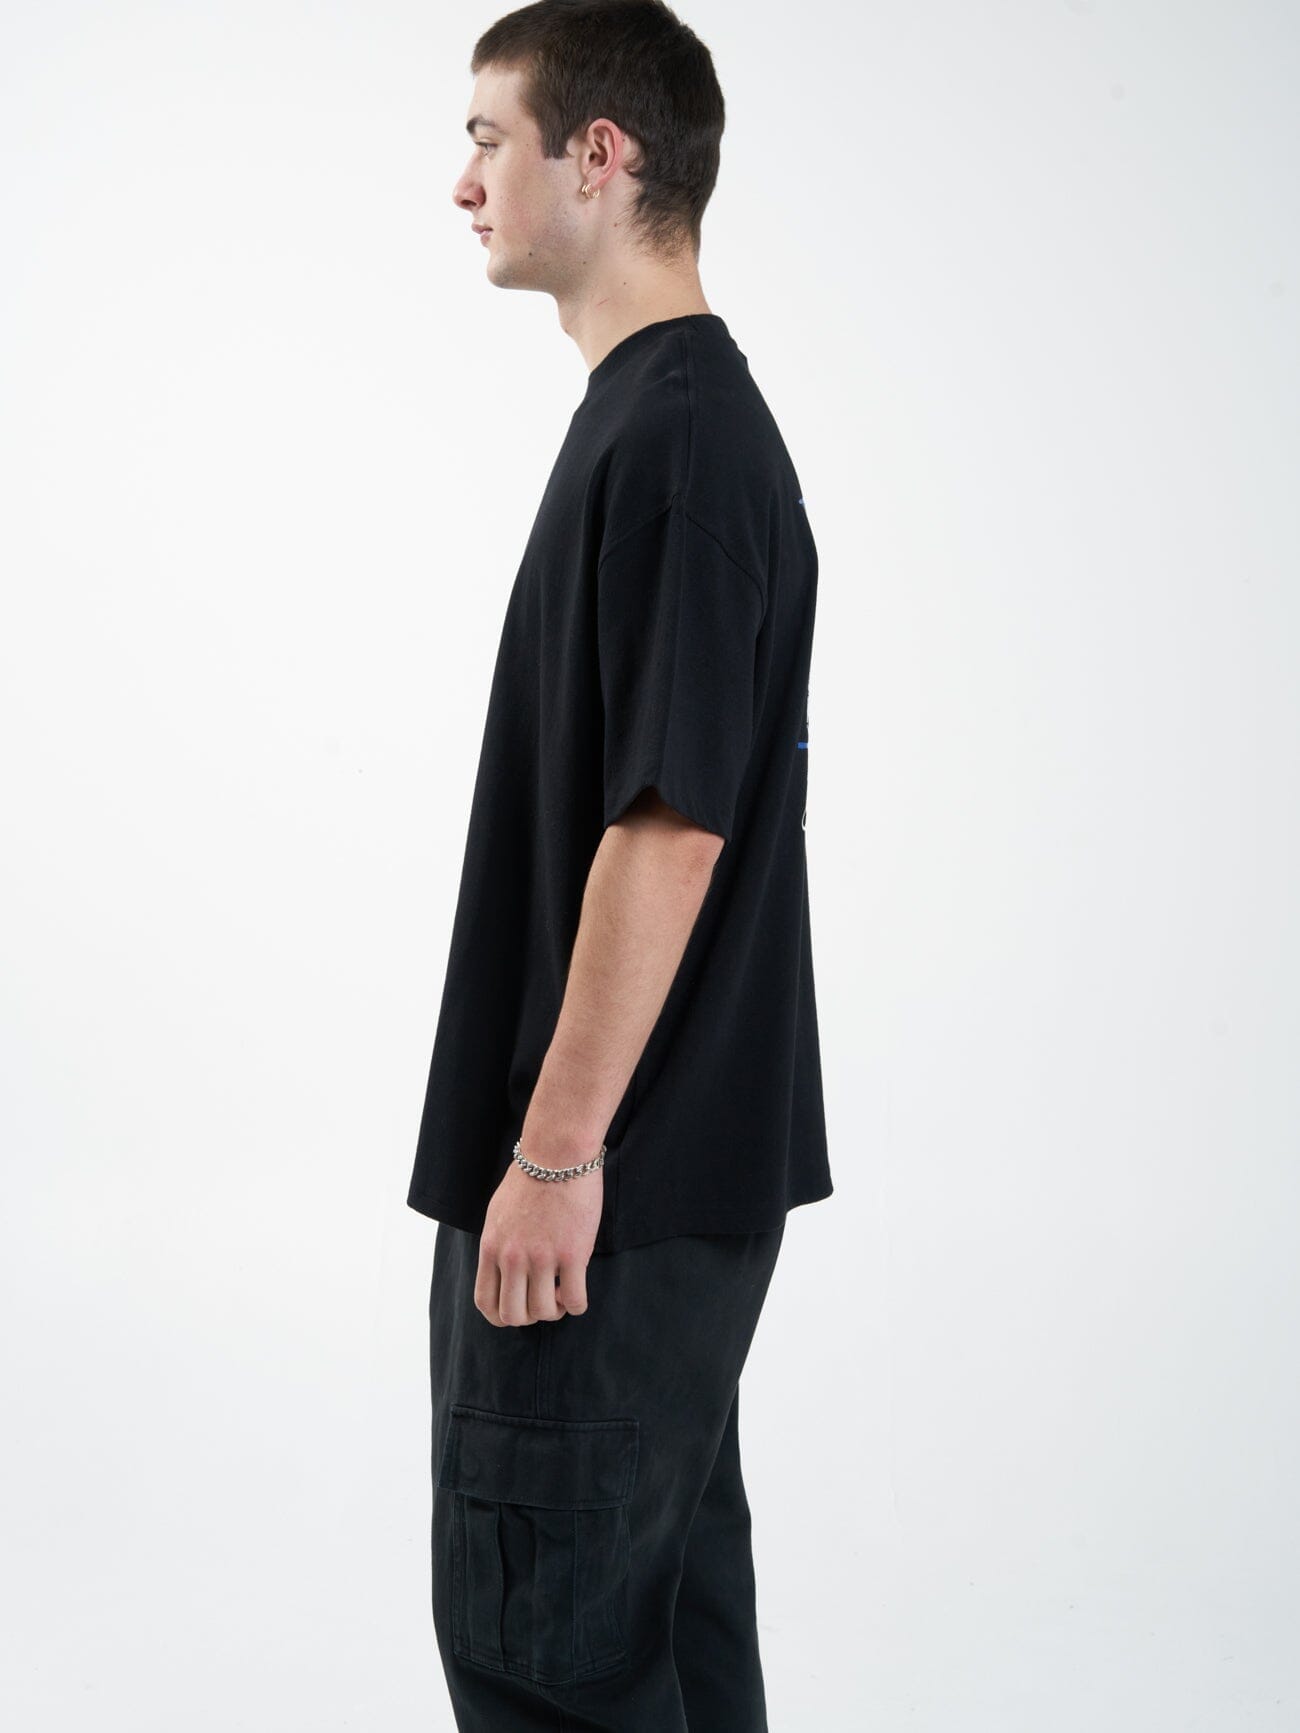 All Power Oversized Fit Tee - Black